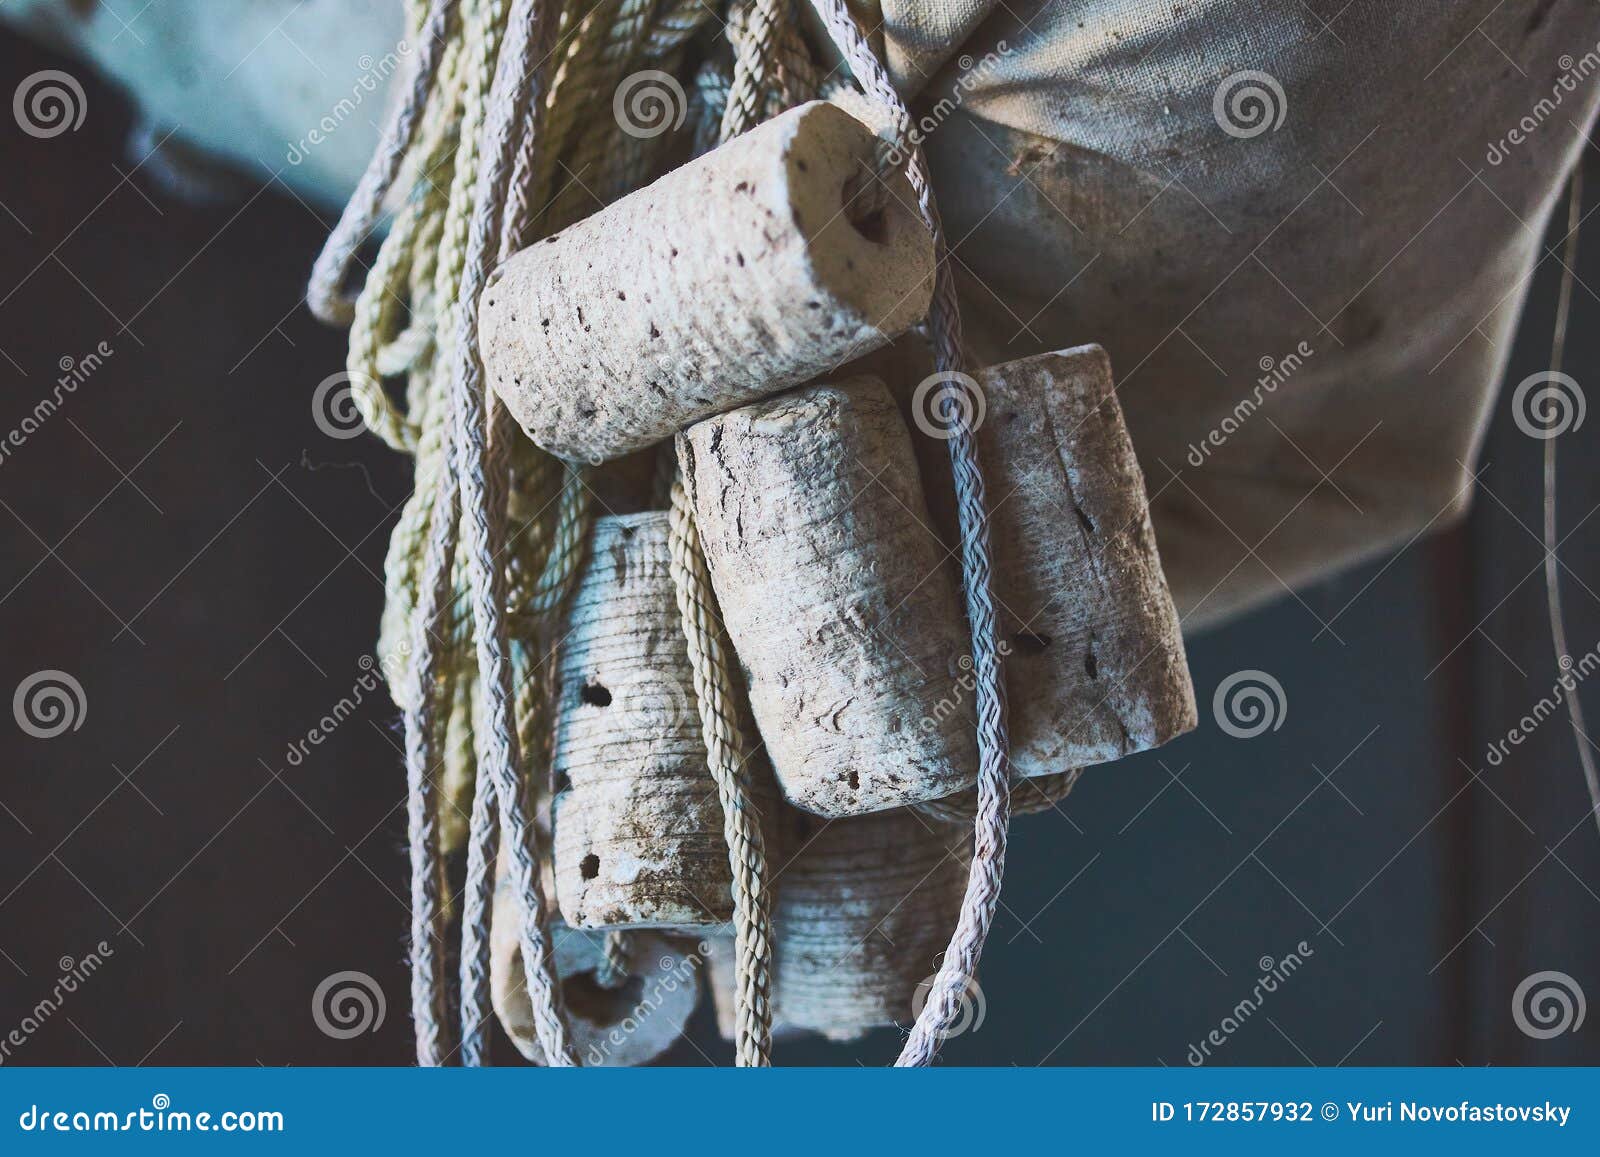 Fishing Net Rope with Old Handmade Cork Floats Stock Photo - Image